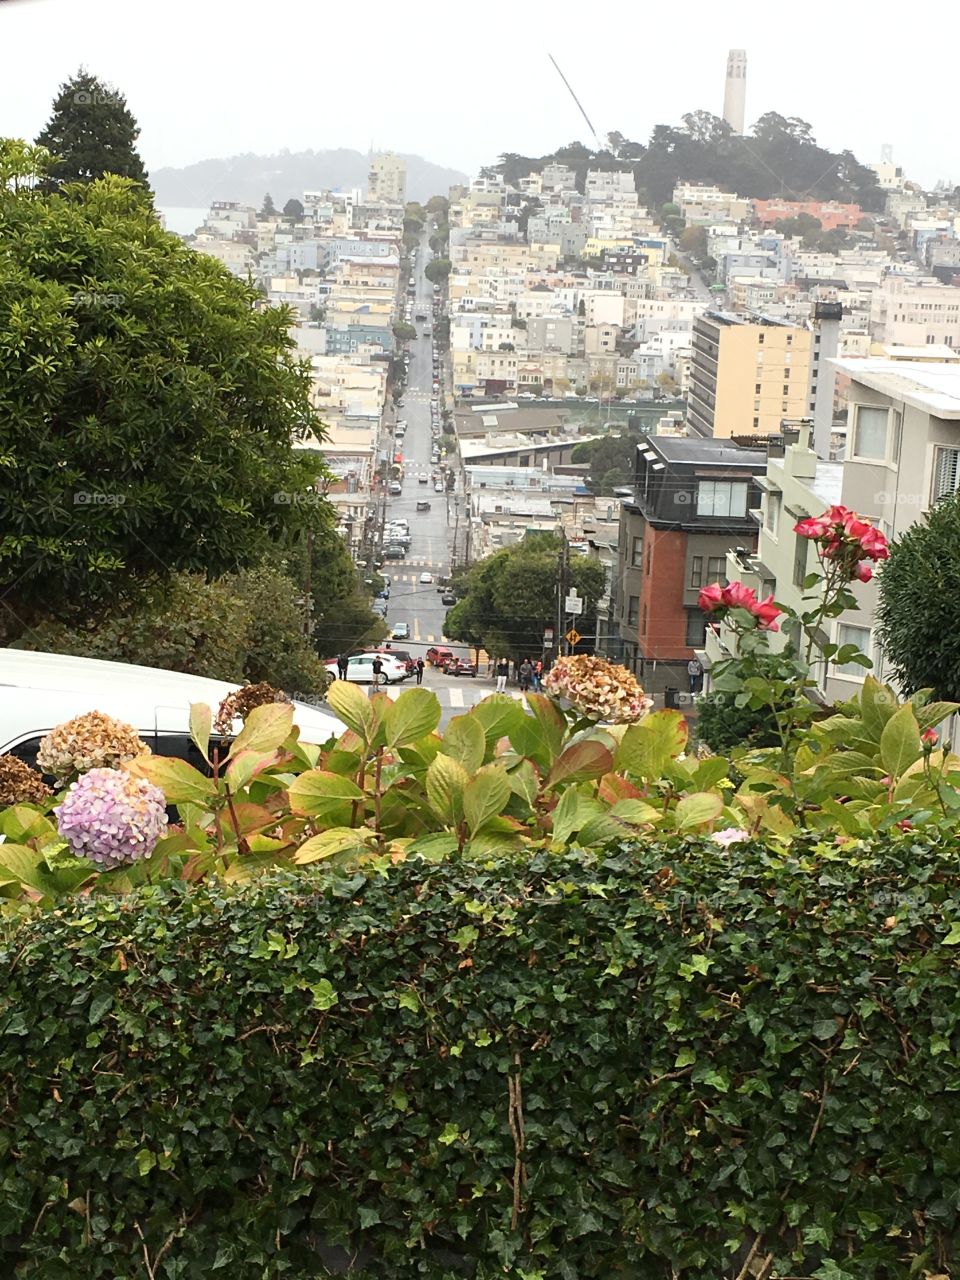 Top of Lombard Street